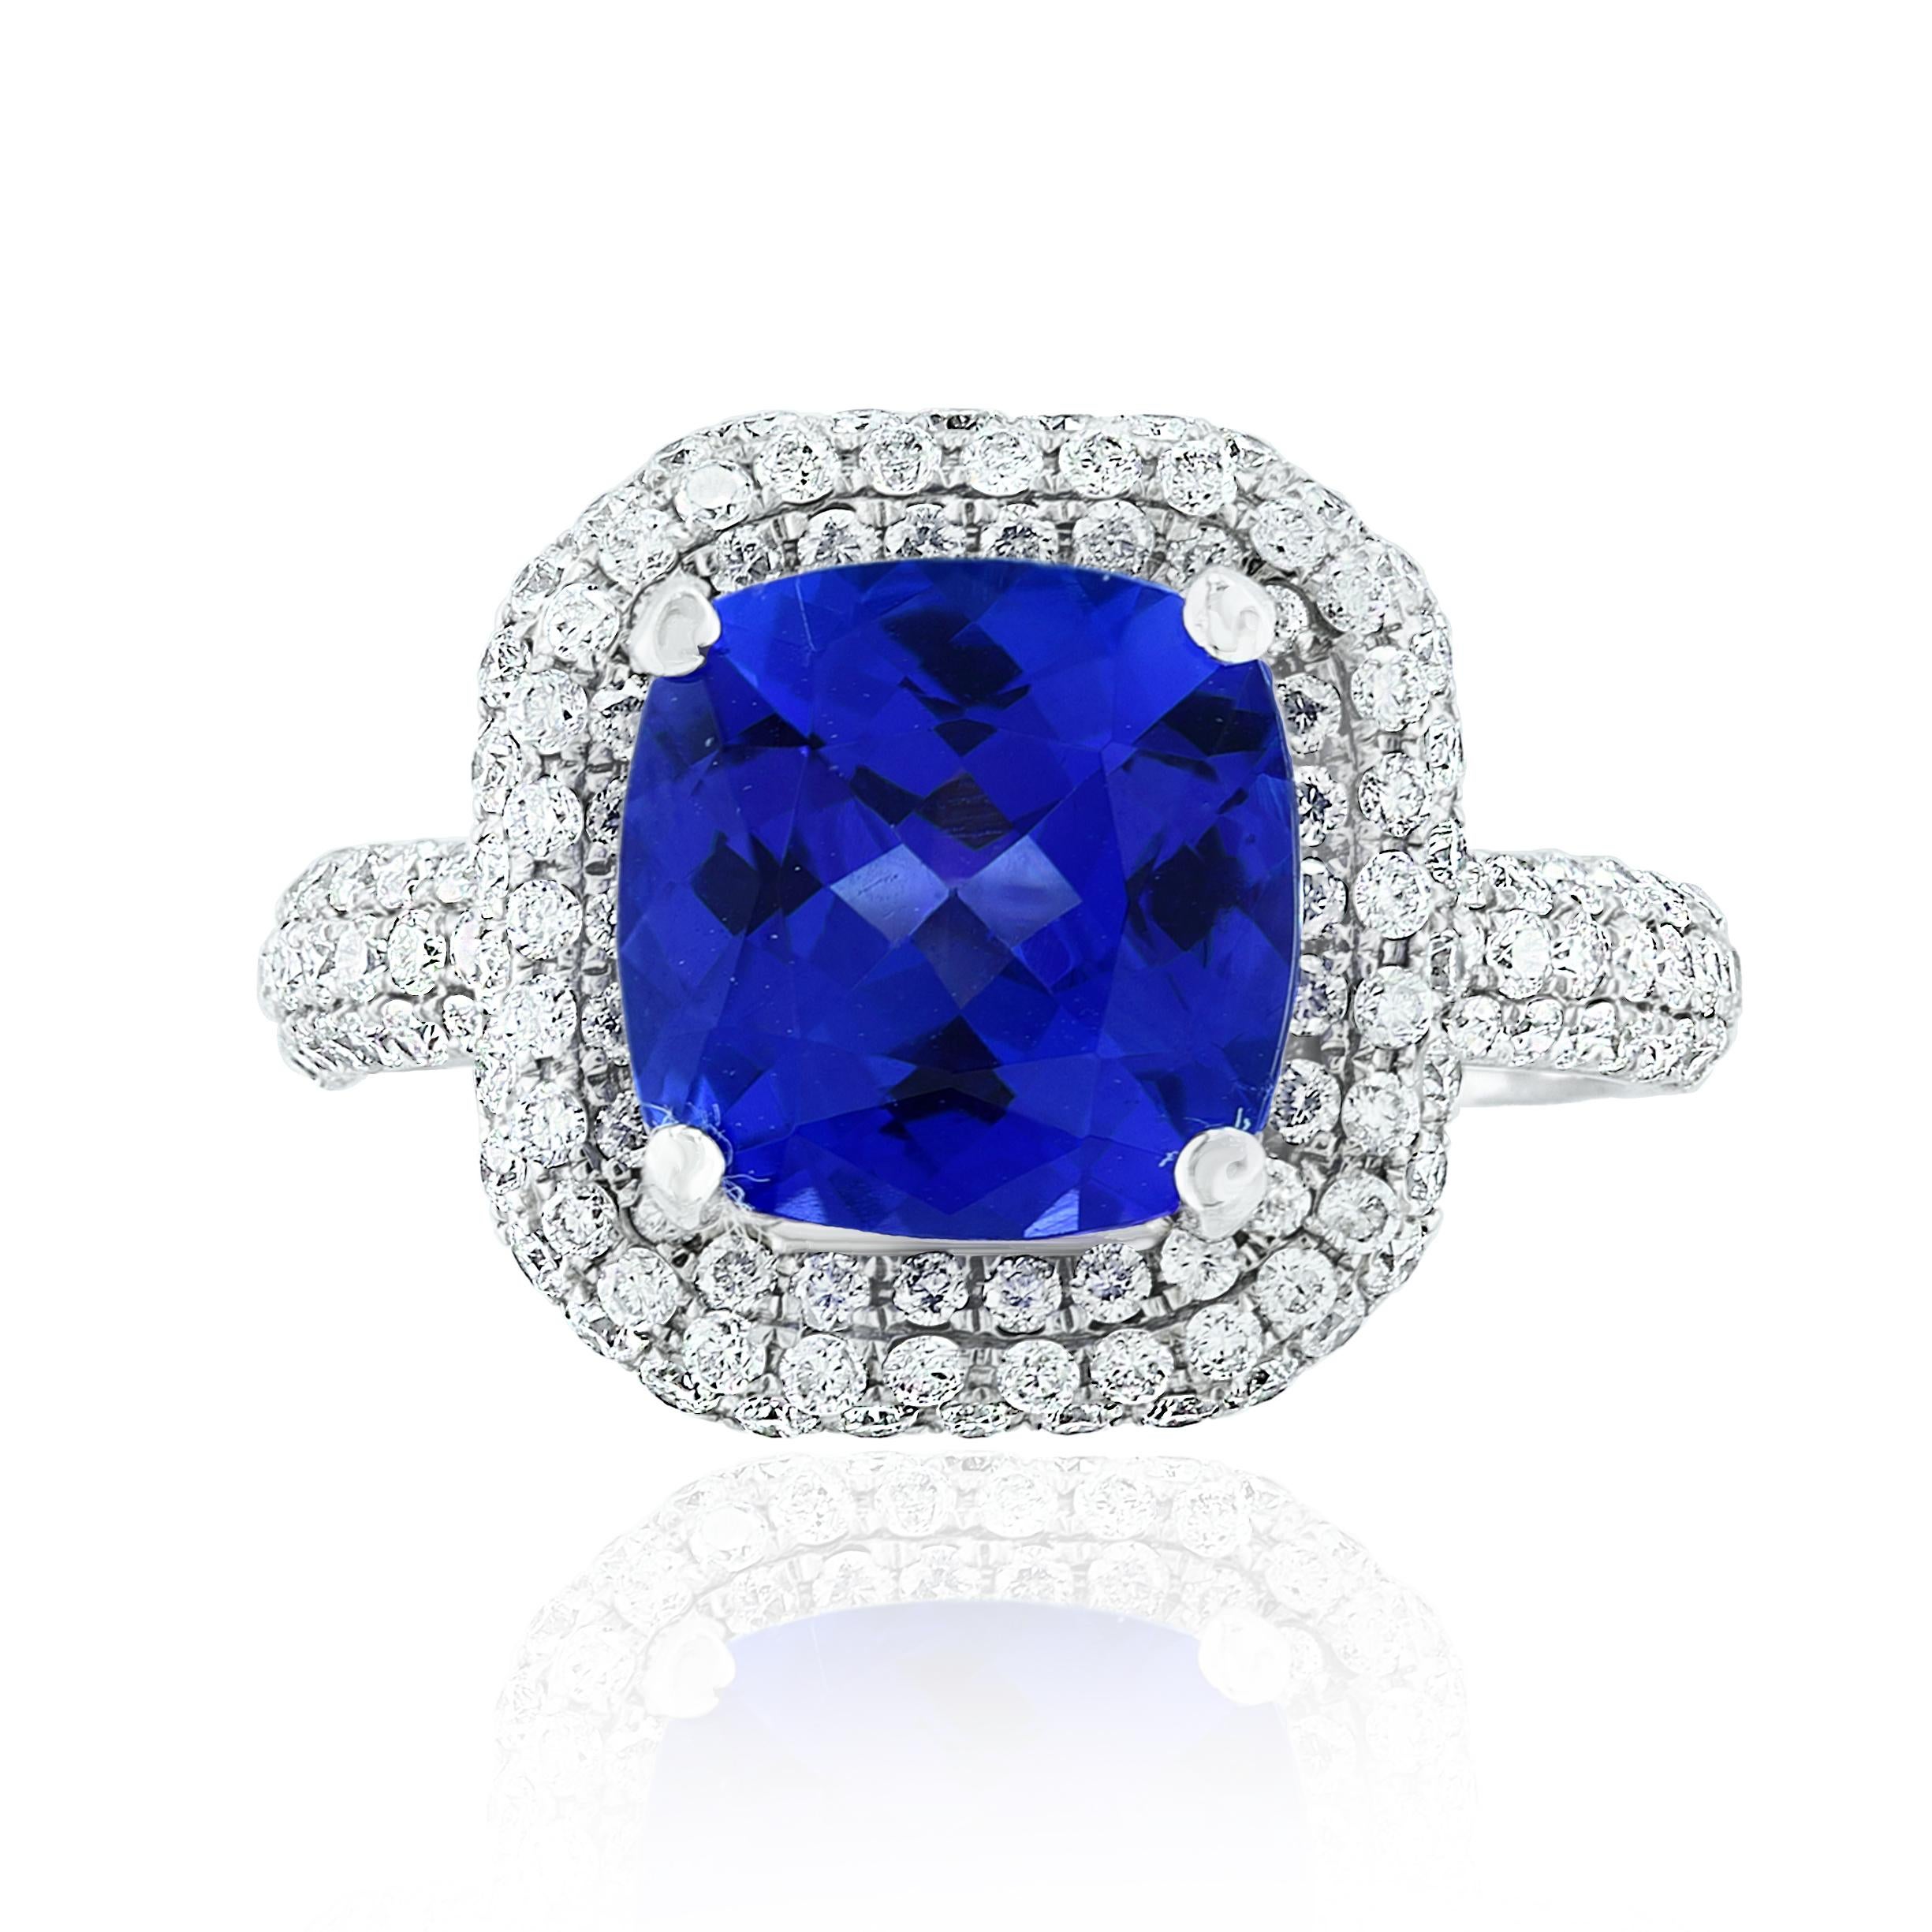 2.98 Carat Cushion Shape vibrant Tanzanite and Diamond Cocktail Ring in 18K White Gold. The Center stone is surrounded by 2 rows of 154 Brilliant cut Round Diamonds with a Total weight of 0.98 carats of total weight. 
A classic Cocktail Ring full of